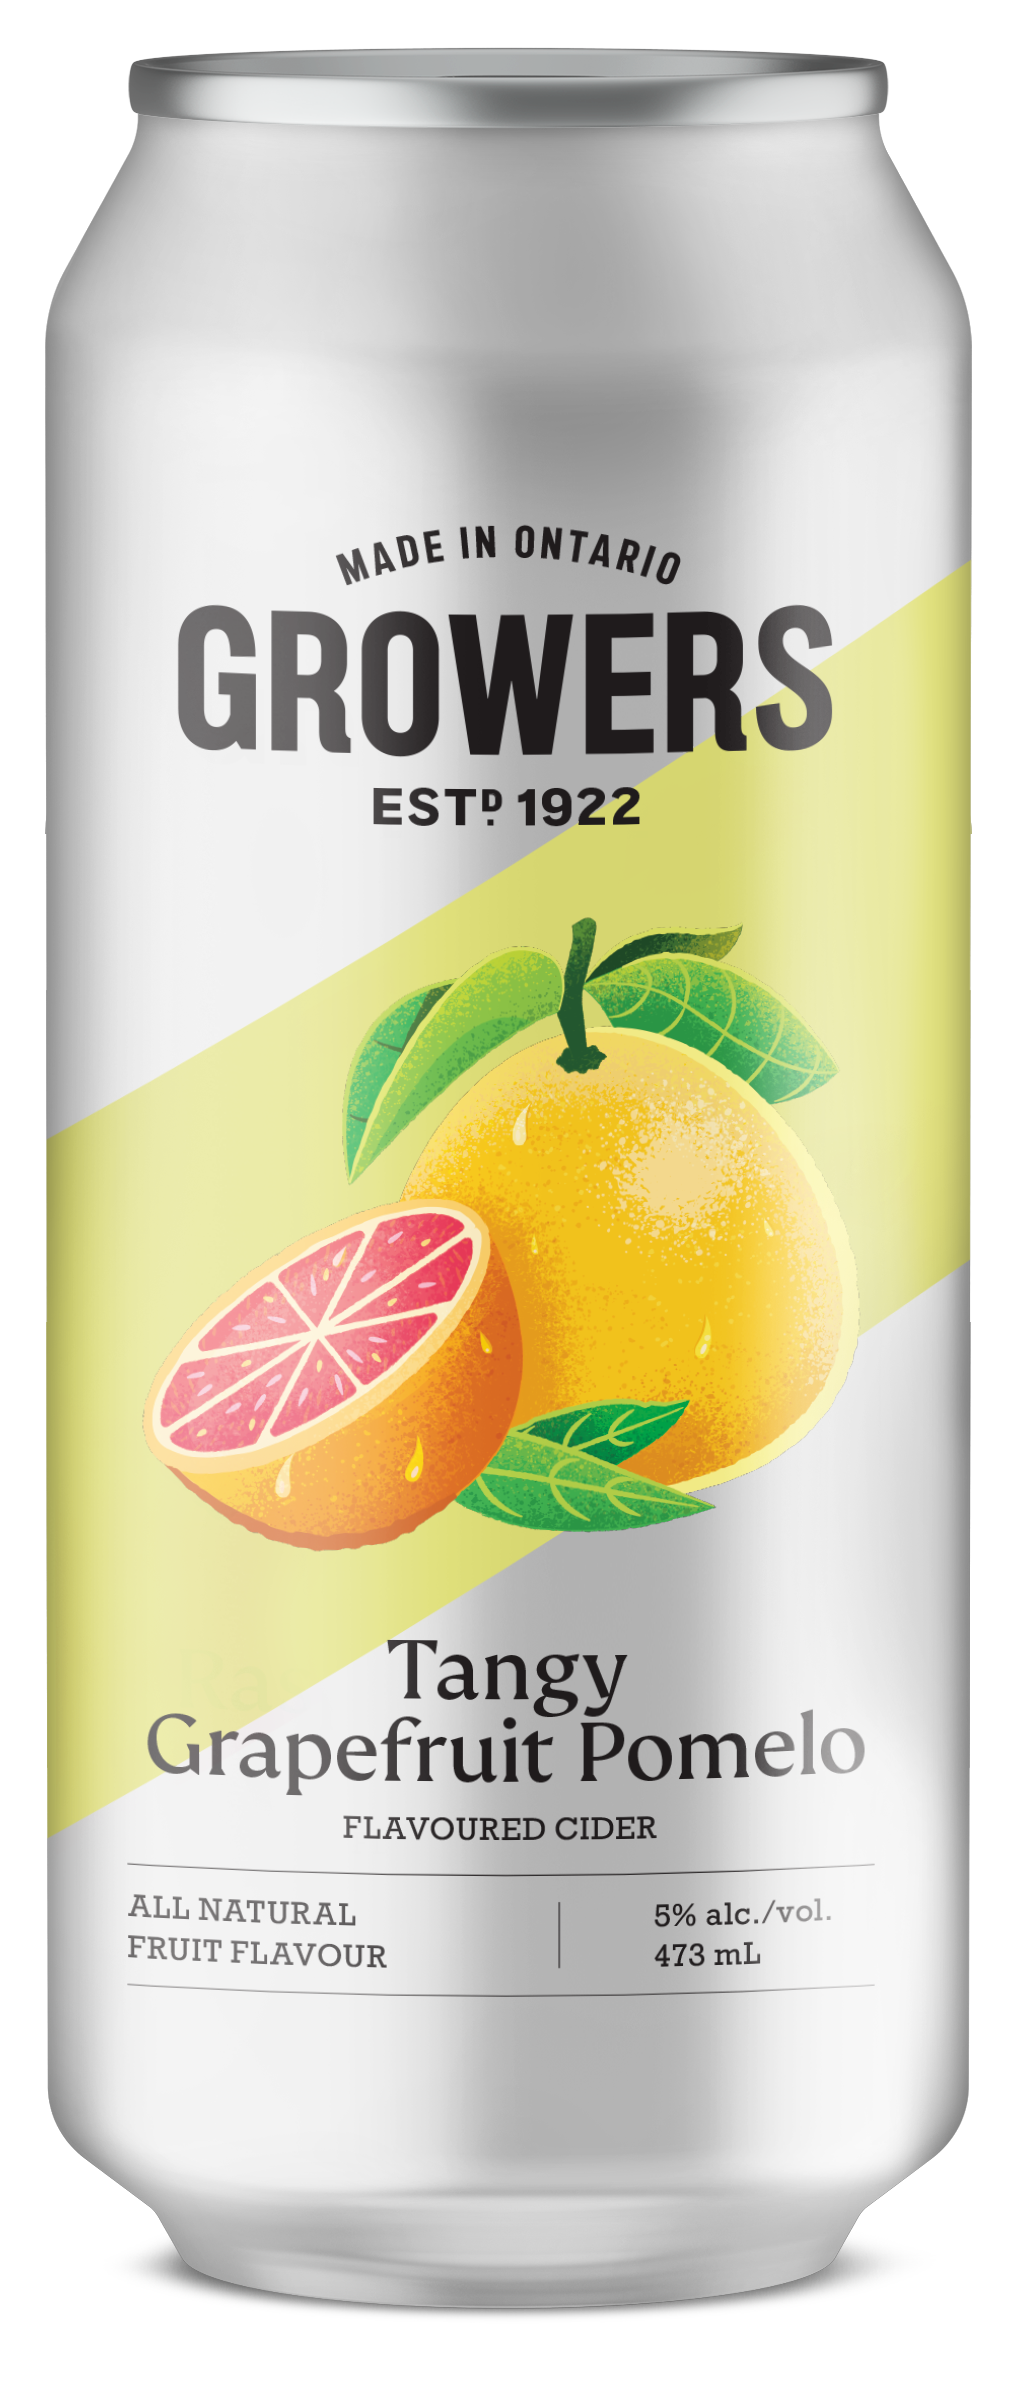 Can of Growers Tangy Grapefruit Pomelo cider